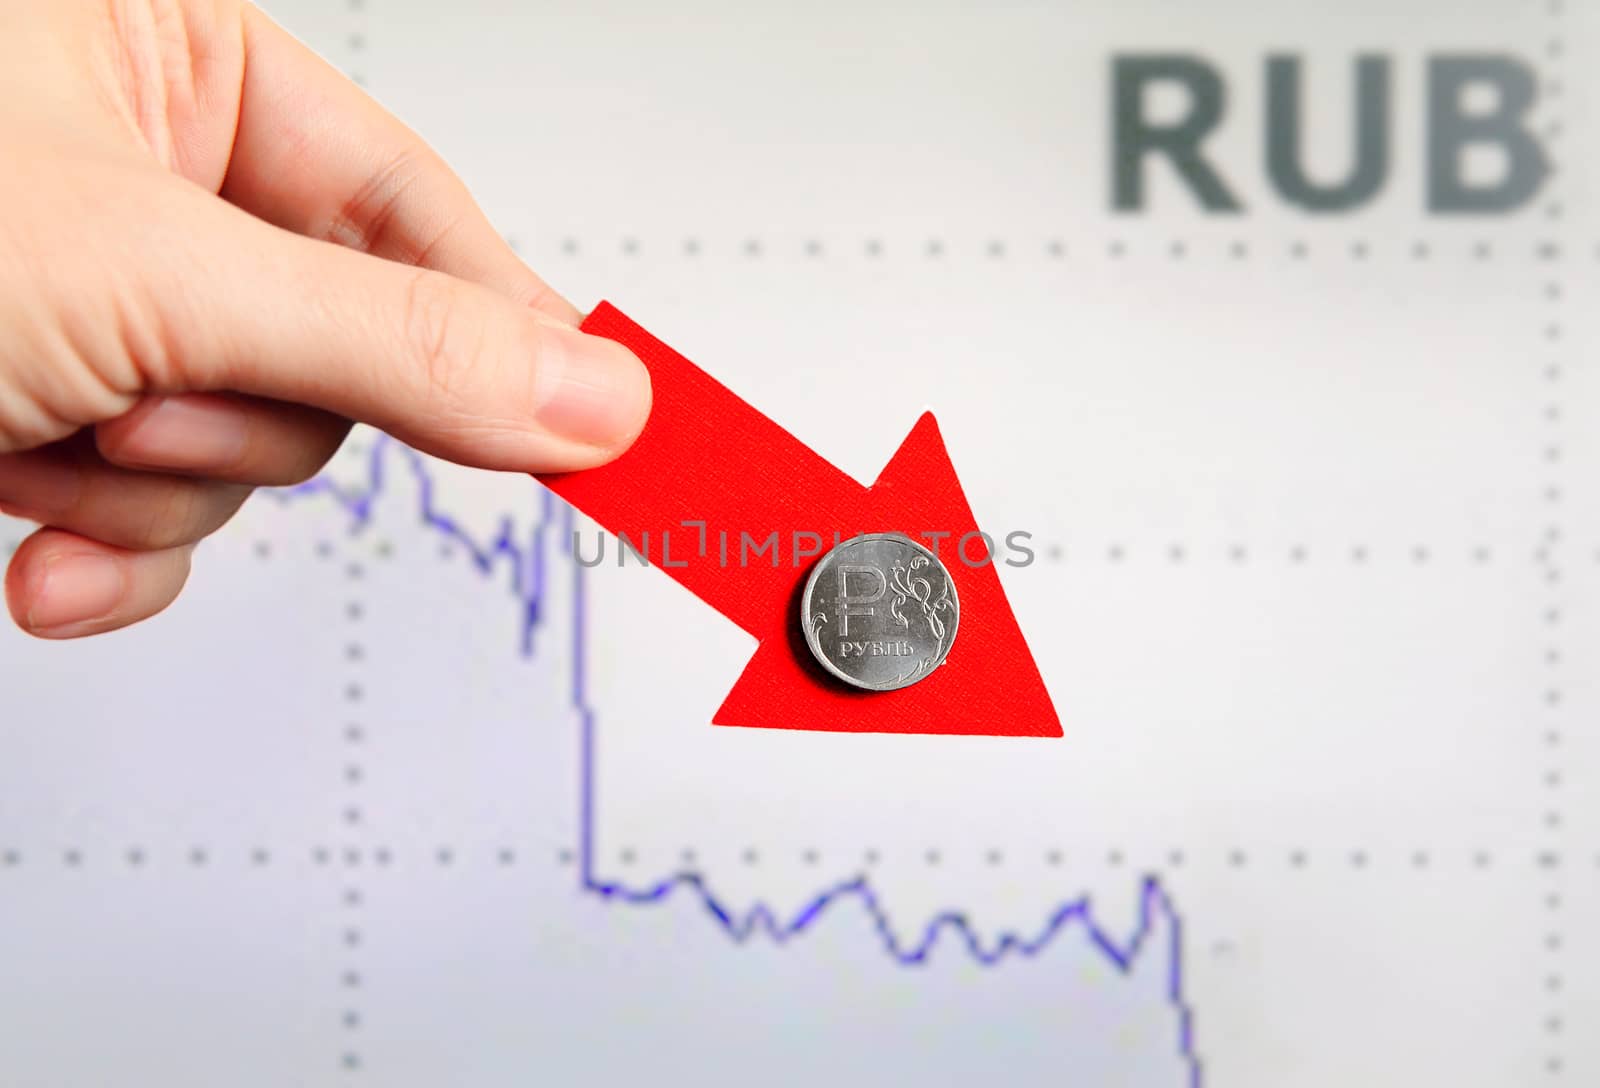 Red Arrow in a Hand with Russian Ruble Down on the Diagram Background